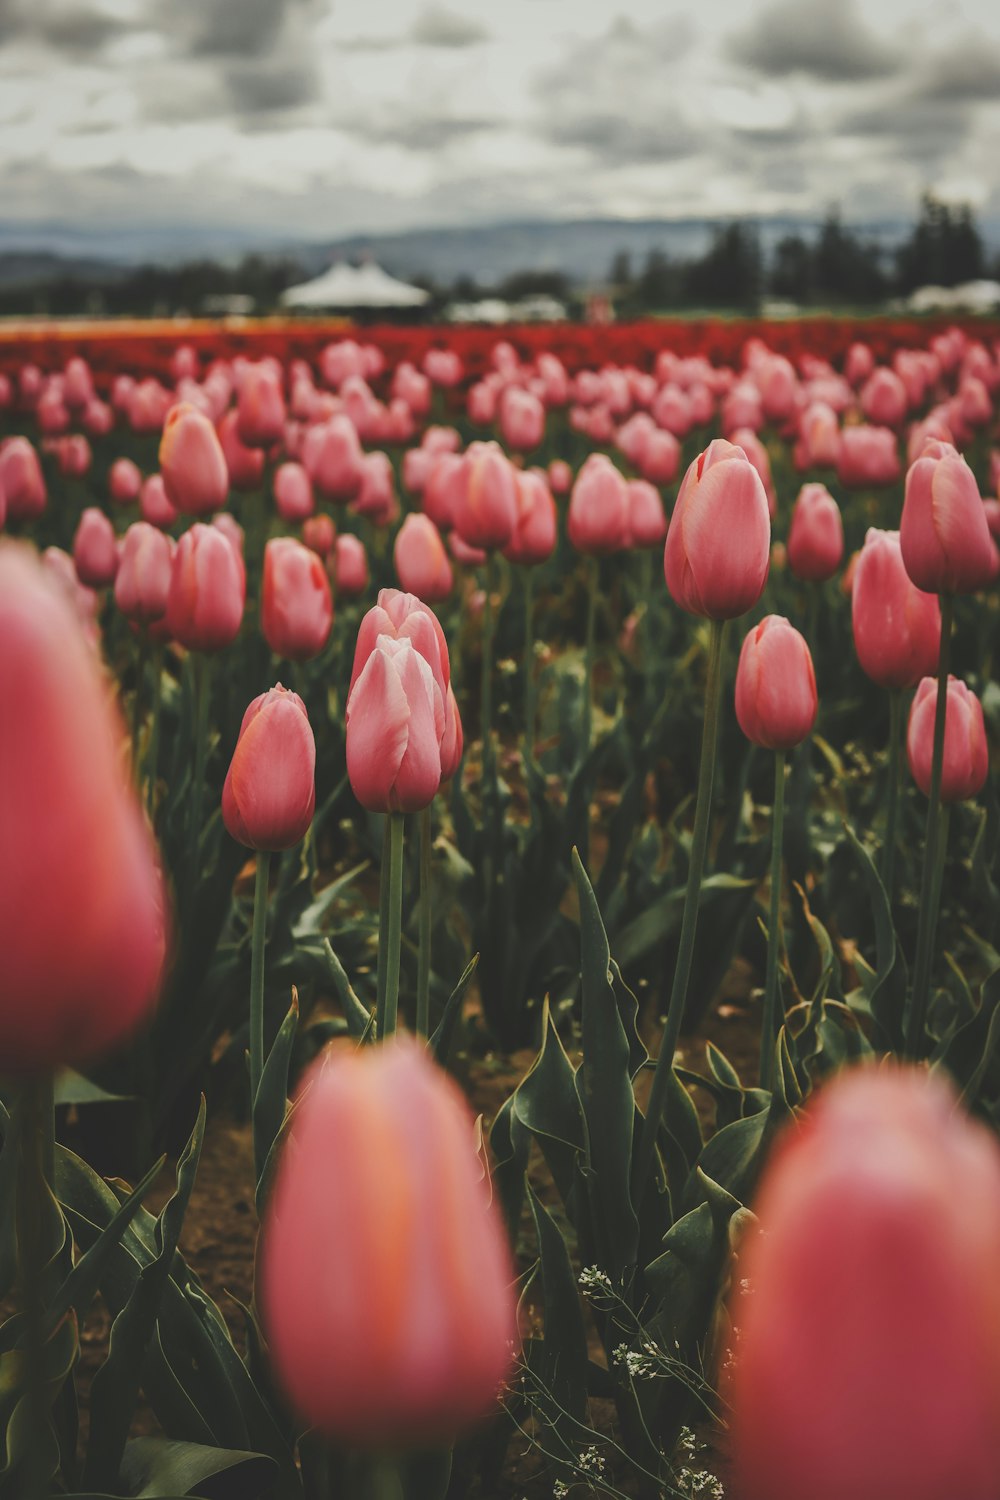 a field full of pink tulips under a cloudy sky